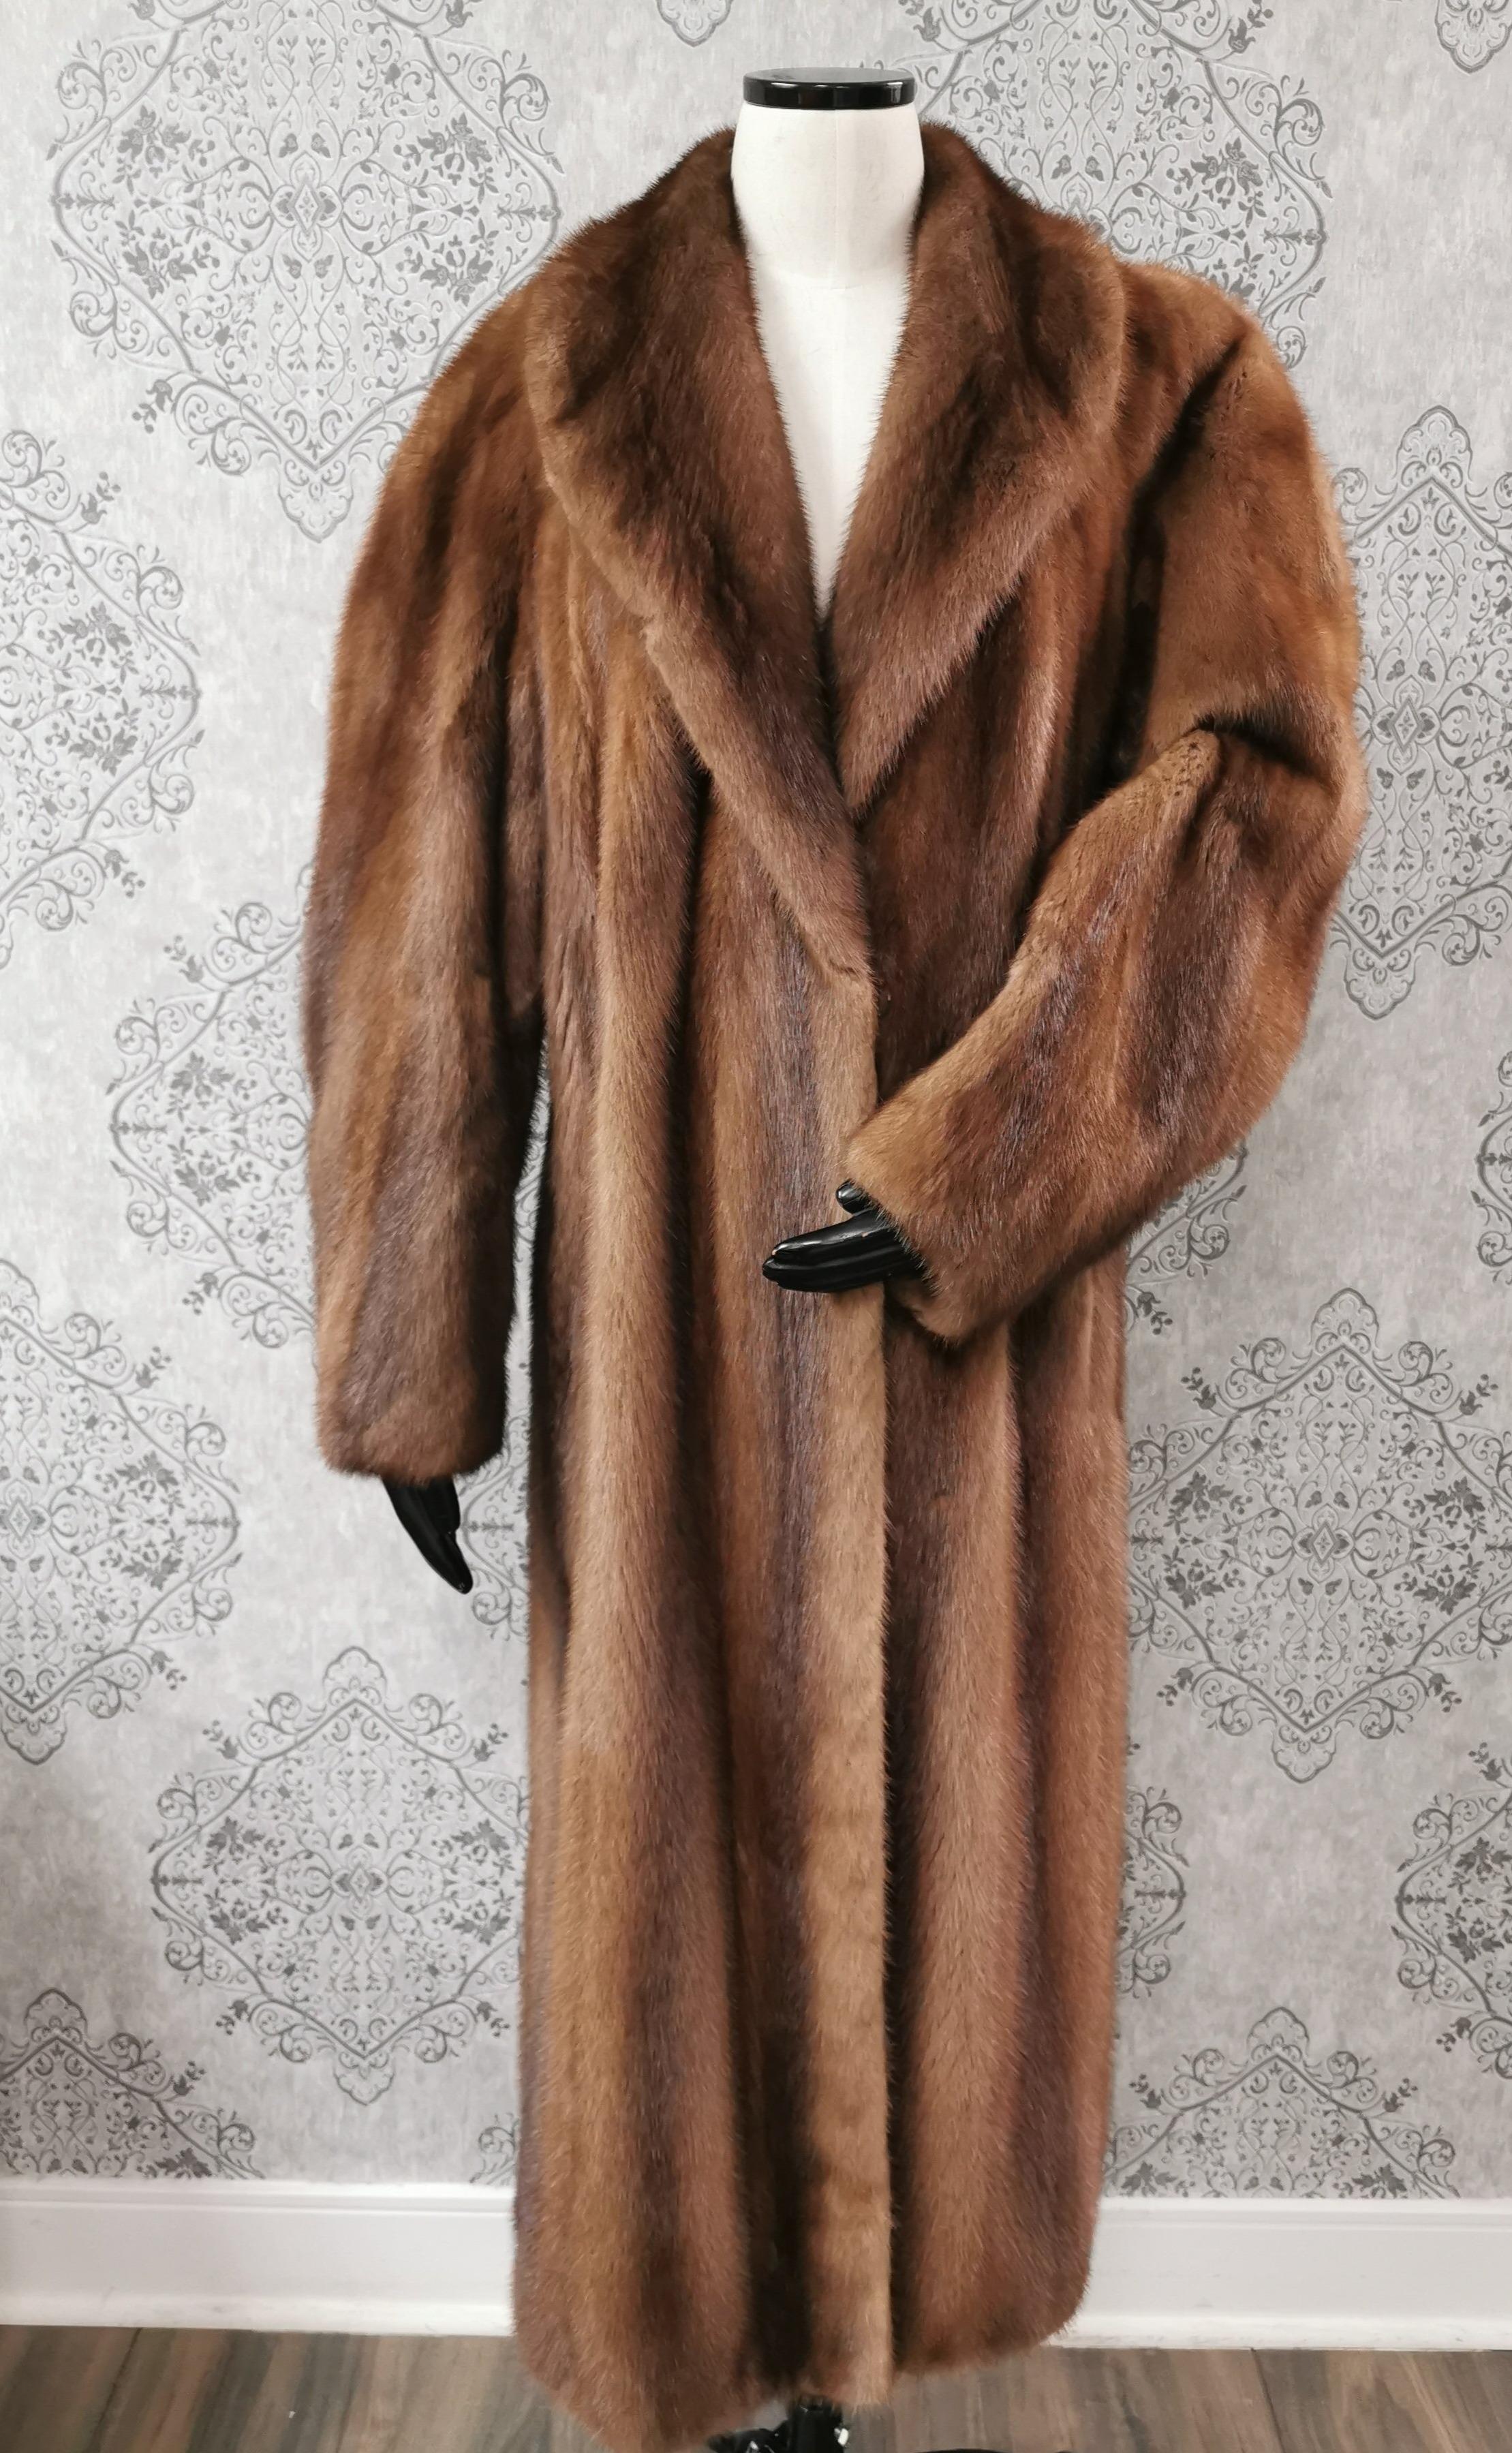 PRODUCT DESCRIPTION:
Brand New elegant demi buff mink fur coat with a mid-length style, soft shoulder lines and gracious shawl collar

Condition: Like New
Closure: Hooks & Eyes
Colour: Demi Buff
Material: Demi Buff Mink
Garment type: Mid-length